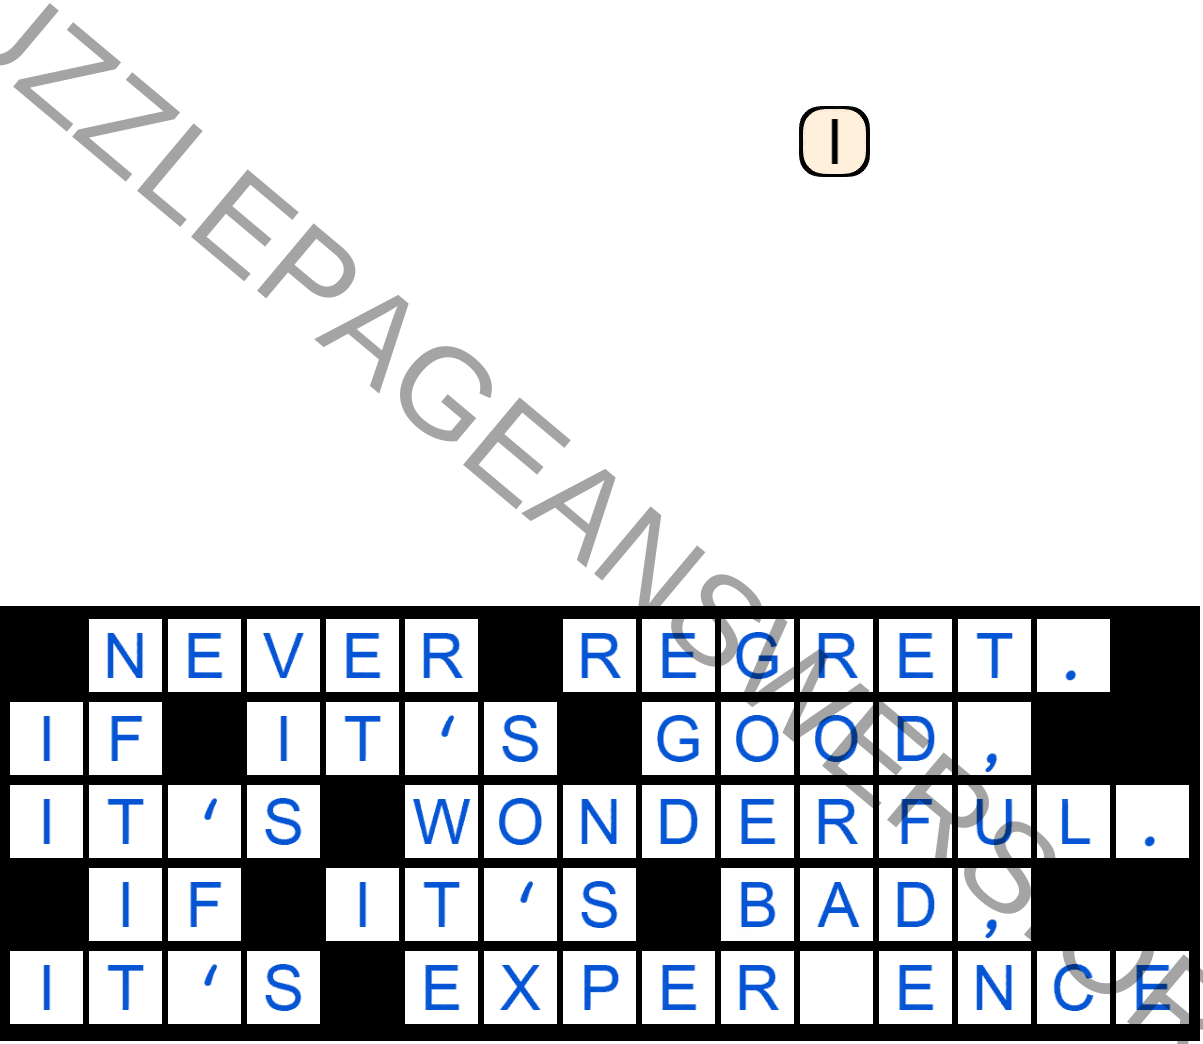 Puzzle Page Quote Slide September 19 2019 Answers - Puzzle Page Answers